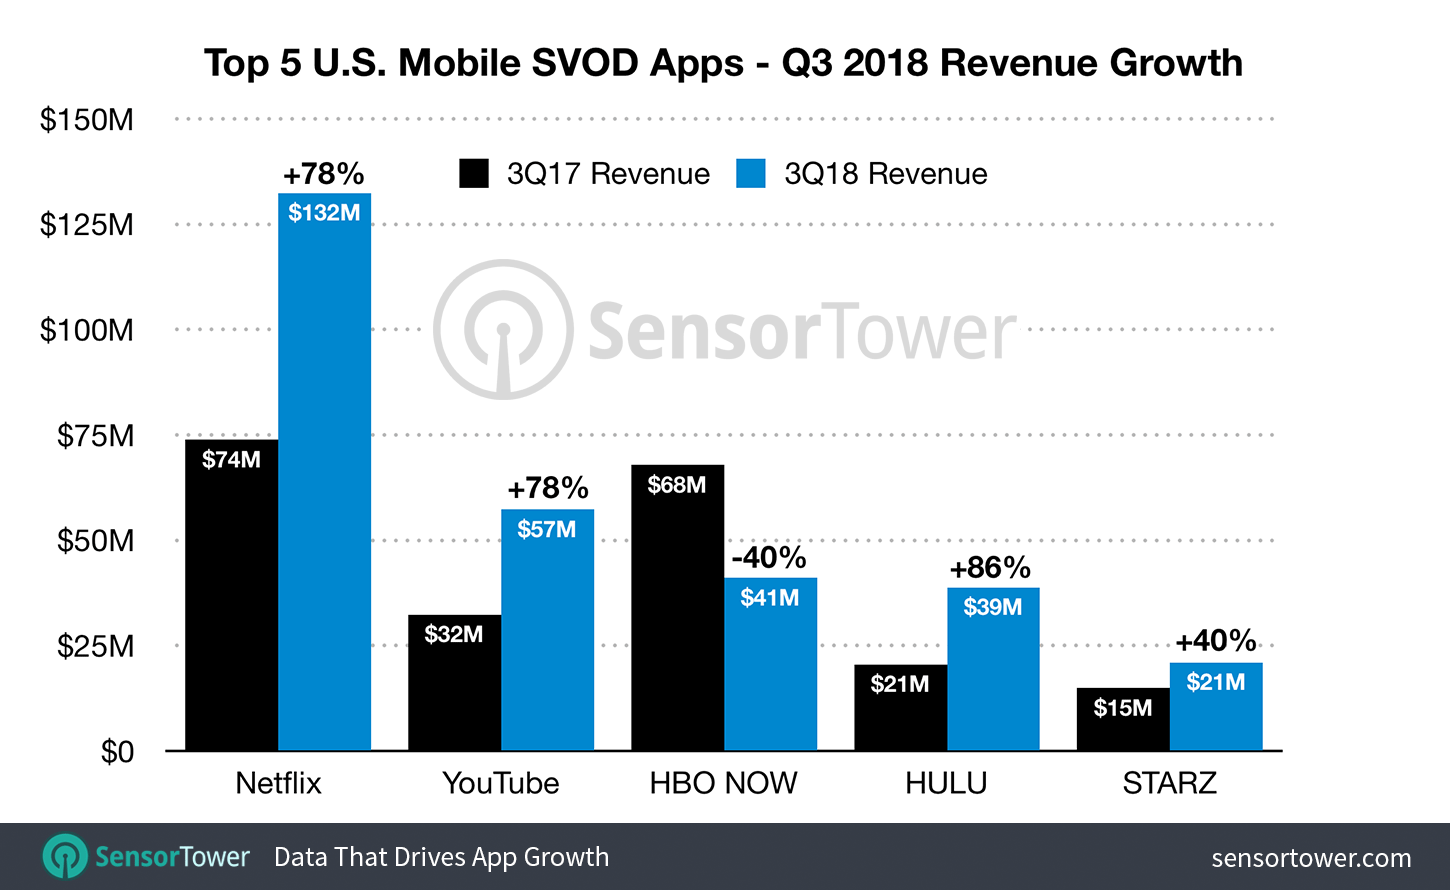 Year-over-Year Revenue Growth for the Top Five U.S. SVOD Apps in Q3 2018